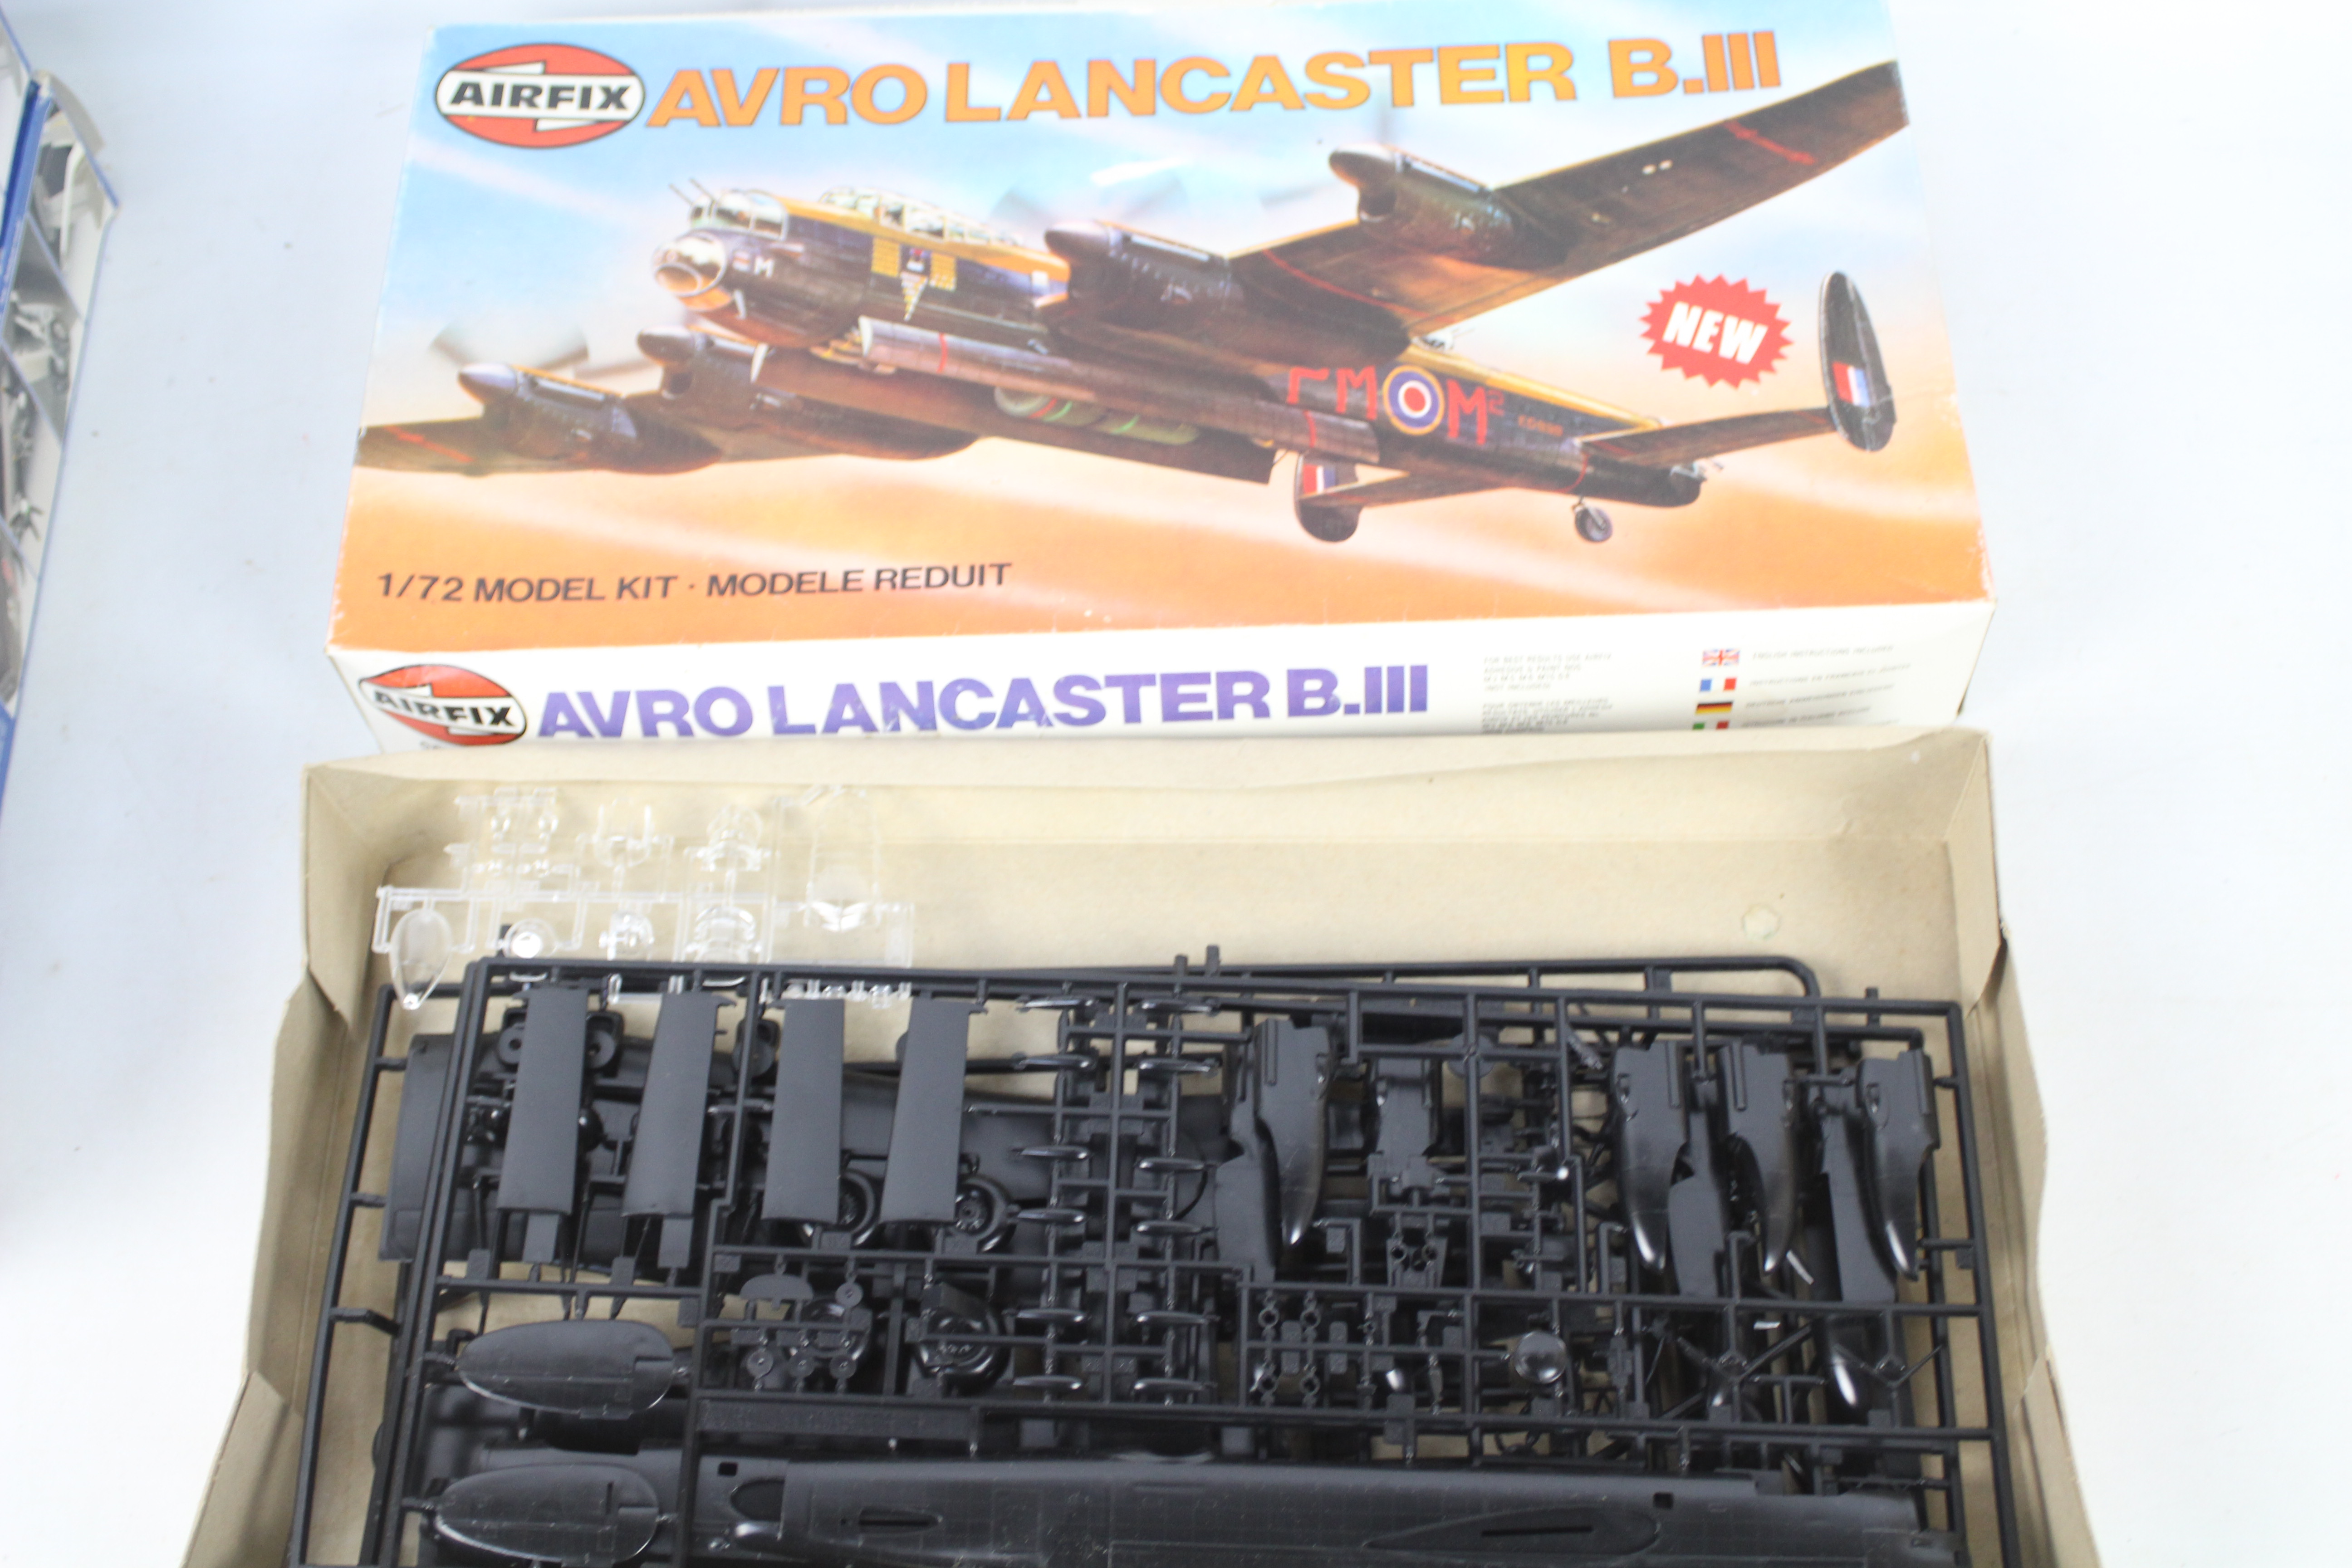 Airfix - Revell - Five boxed plastic military aircraft model kits in 1:72 scale. - Image 4 of 5